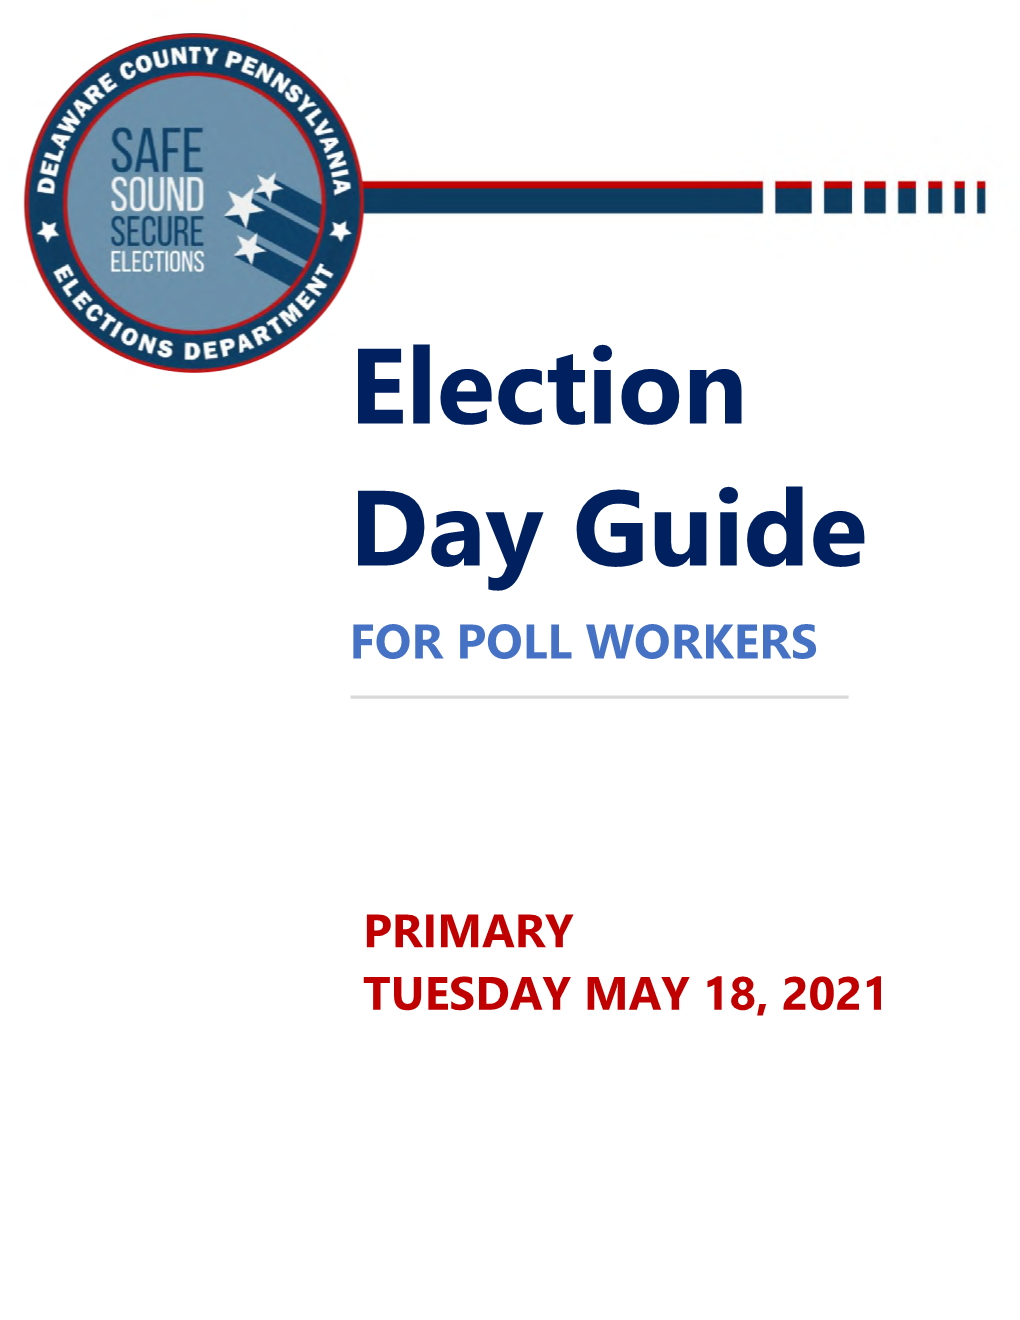 Election Day Guide for Poll Workers (Primary, Tuesday May 18, 2021)